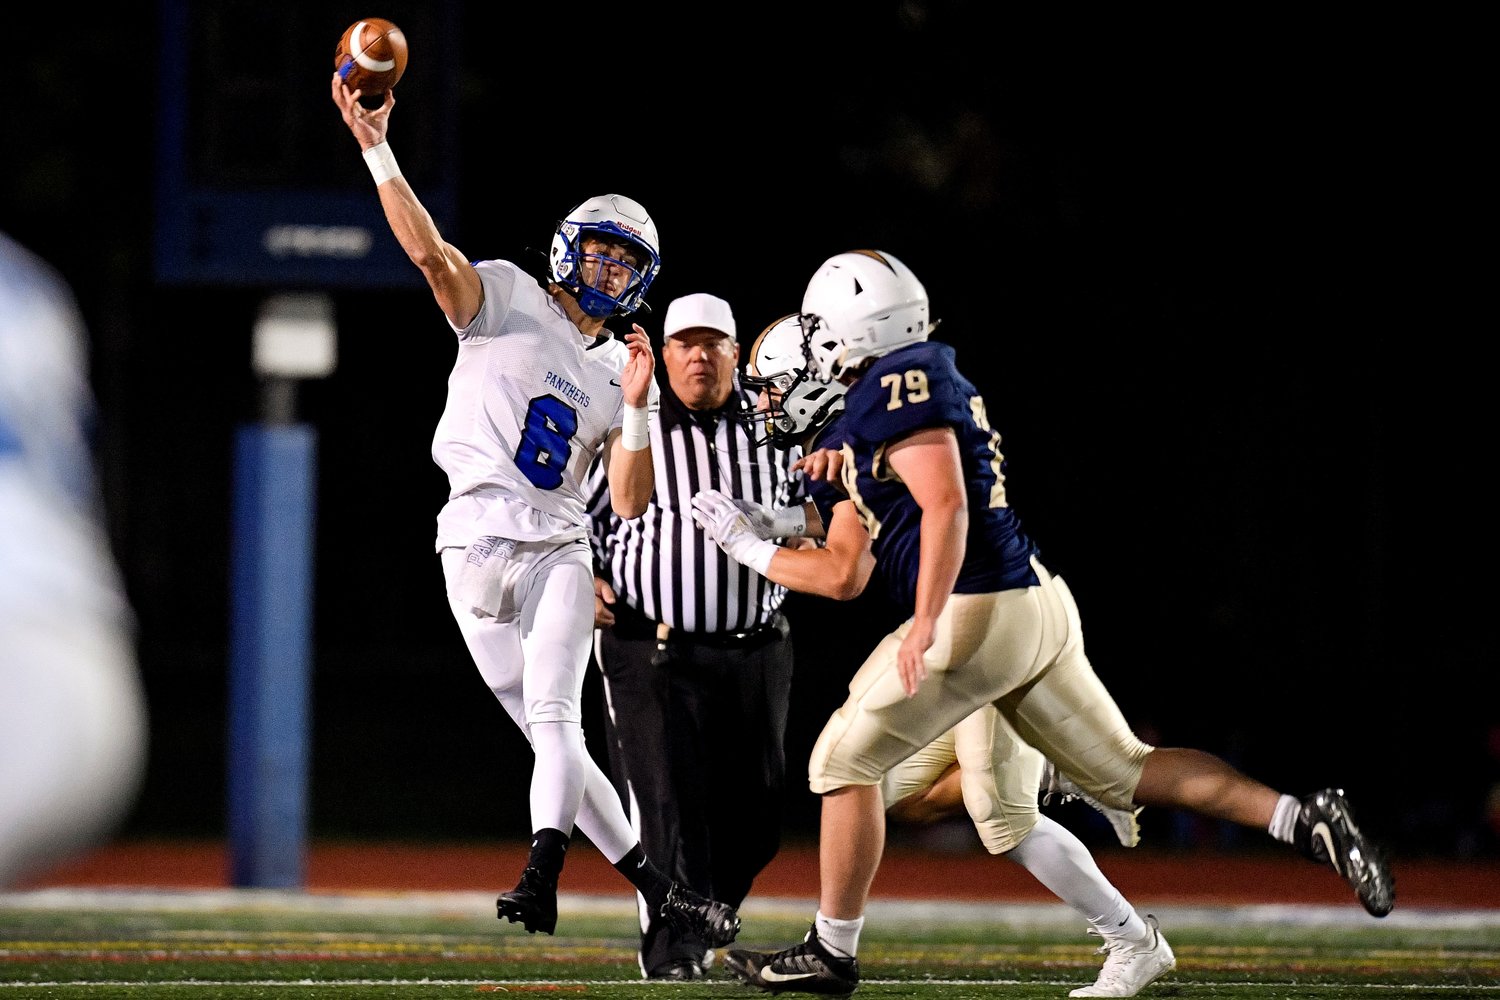 Quakertown QB Vince Micucci launches a long pass as CR South’s Anthony Carey and Jim St. Thomas close in.